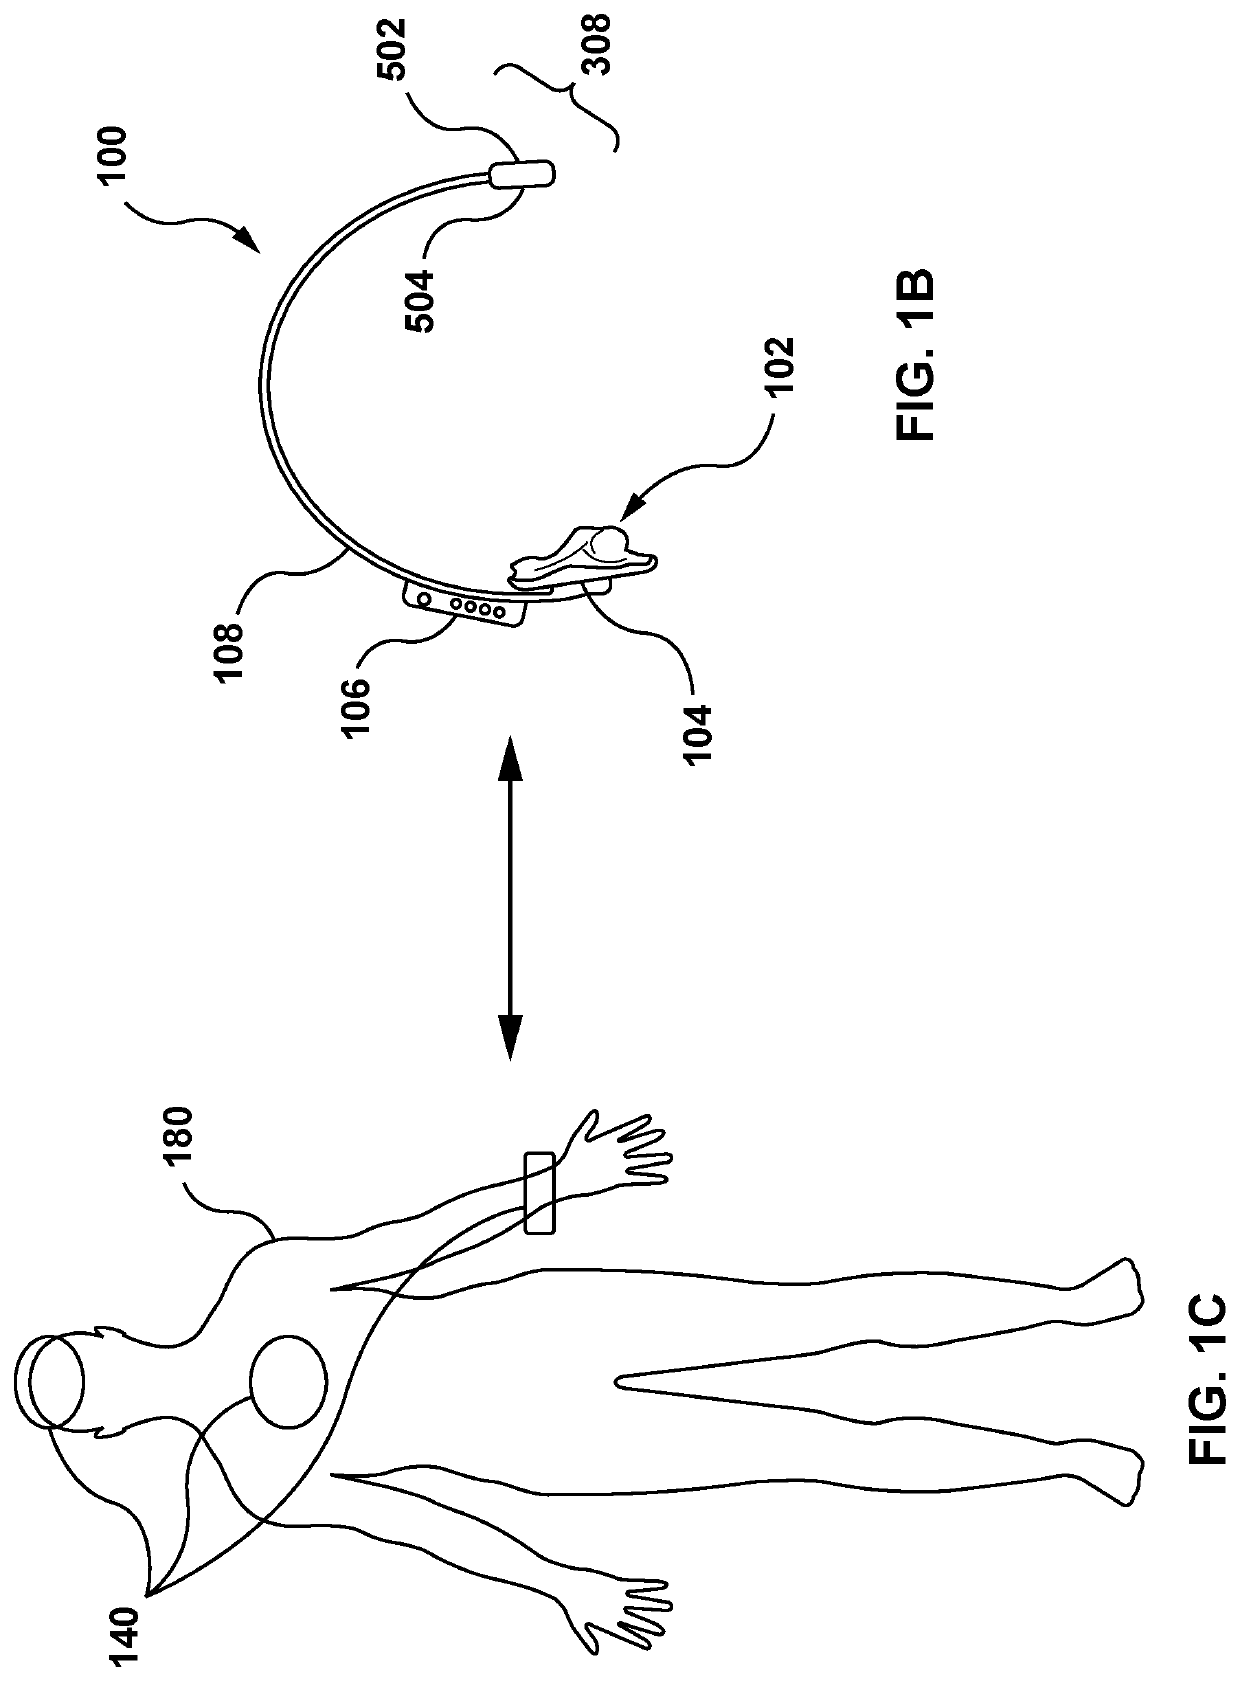 Devices, systems and methods for auricular acupuncture